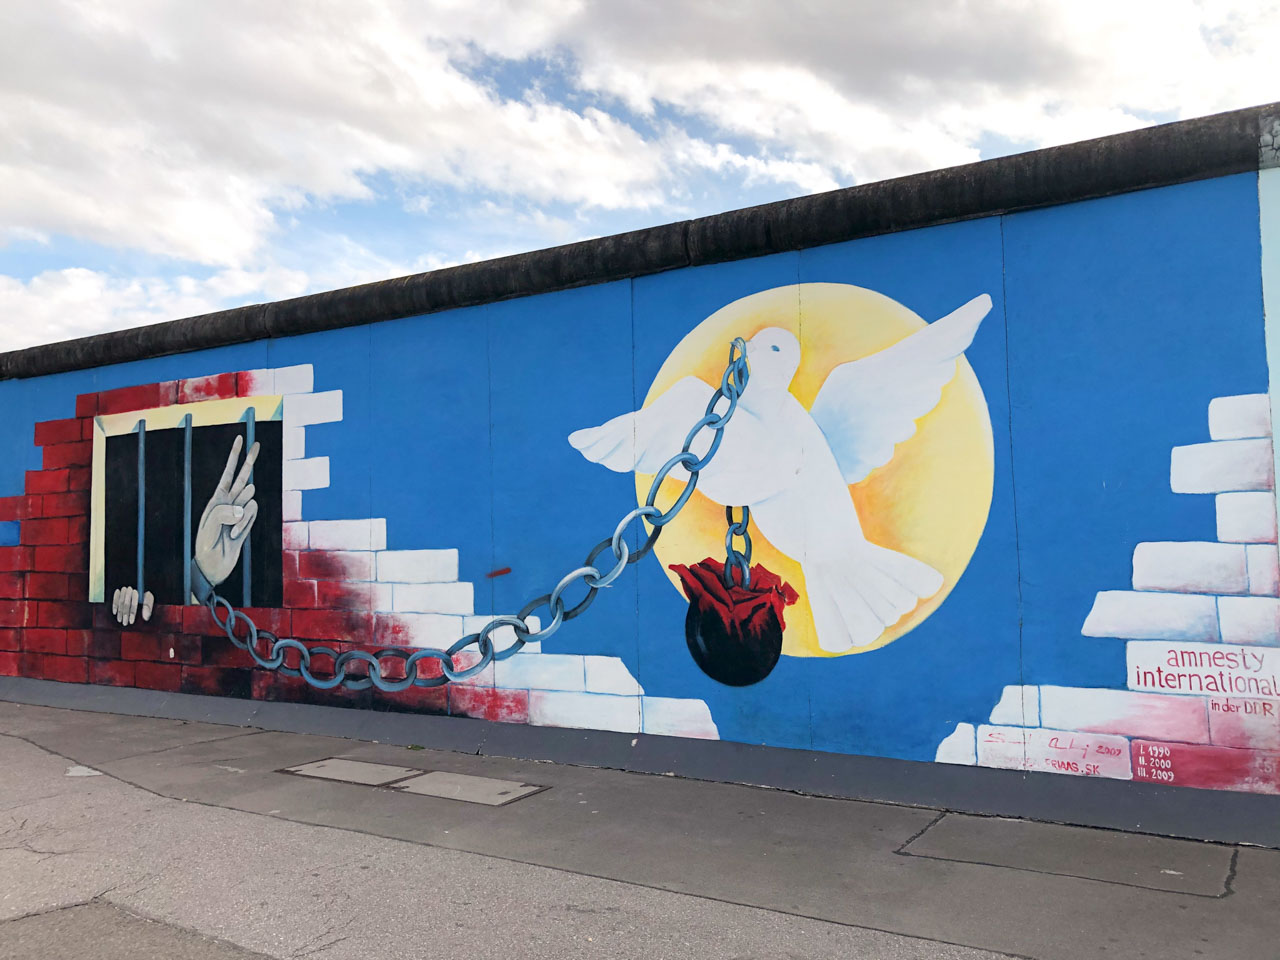 Mural depicting a peace dove freeing prisoners at the East Side Gallery